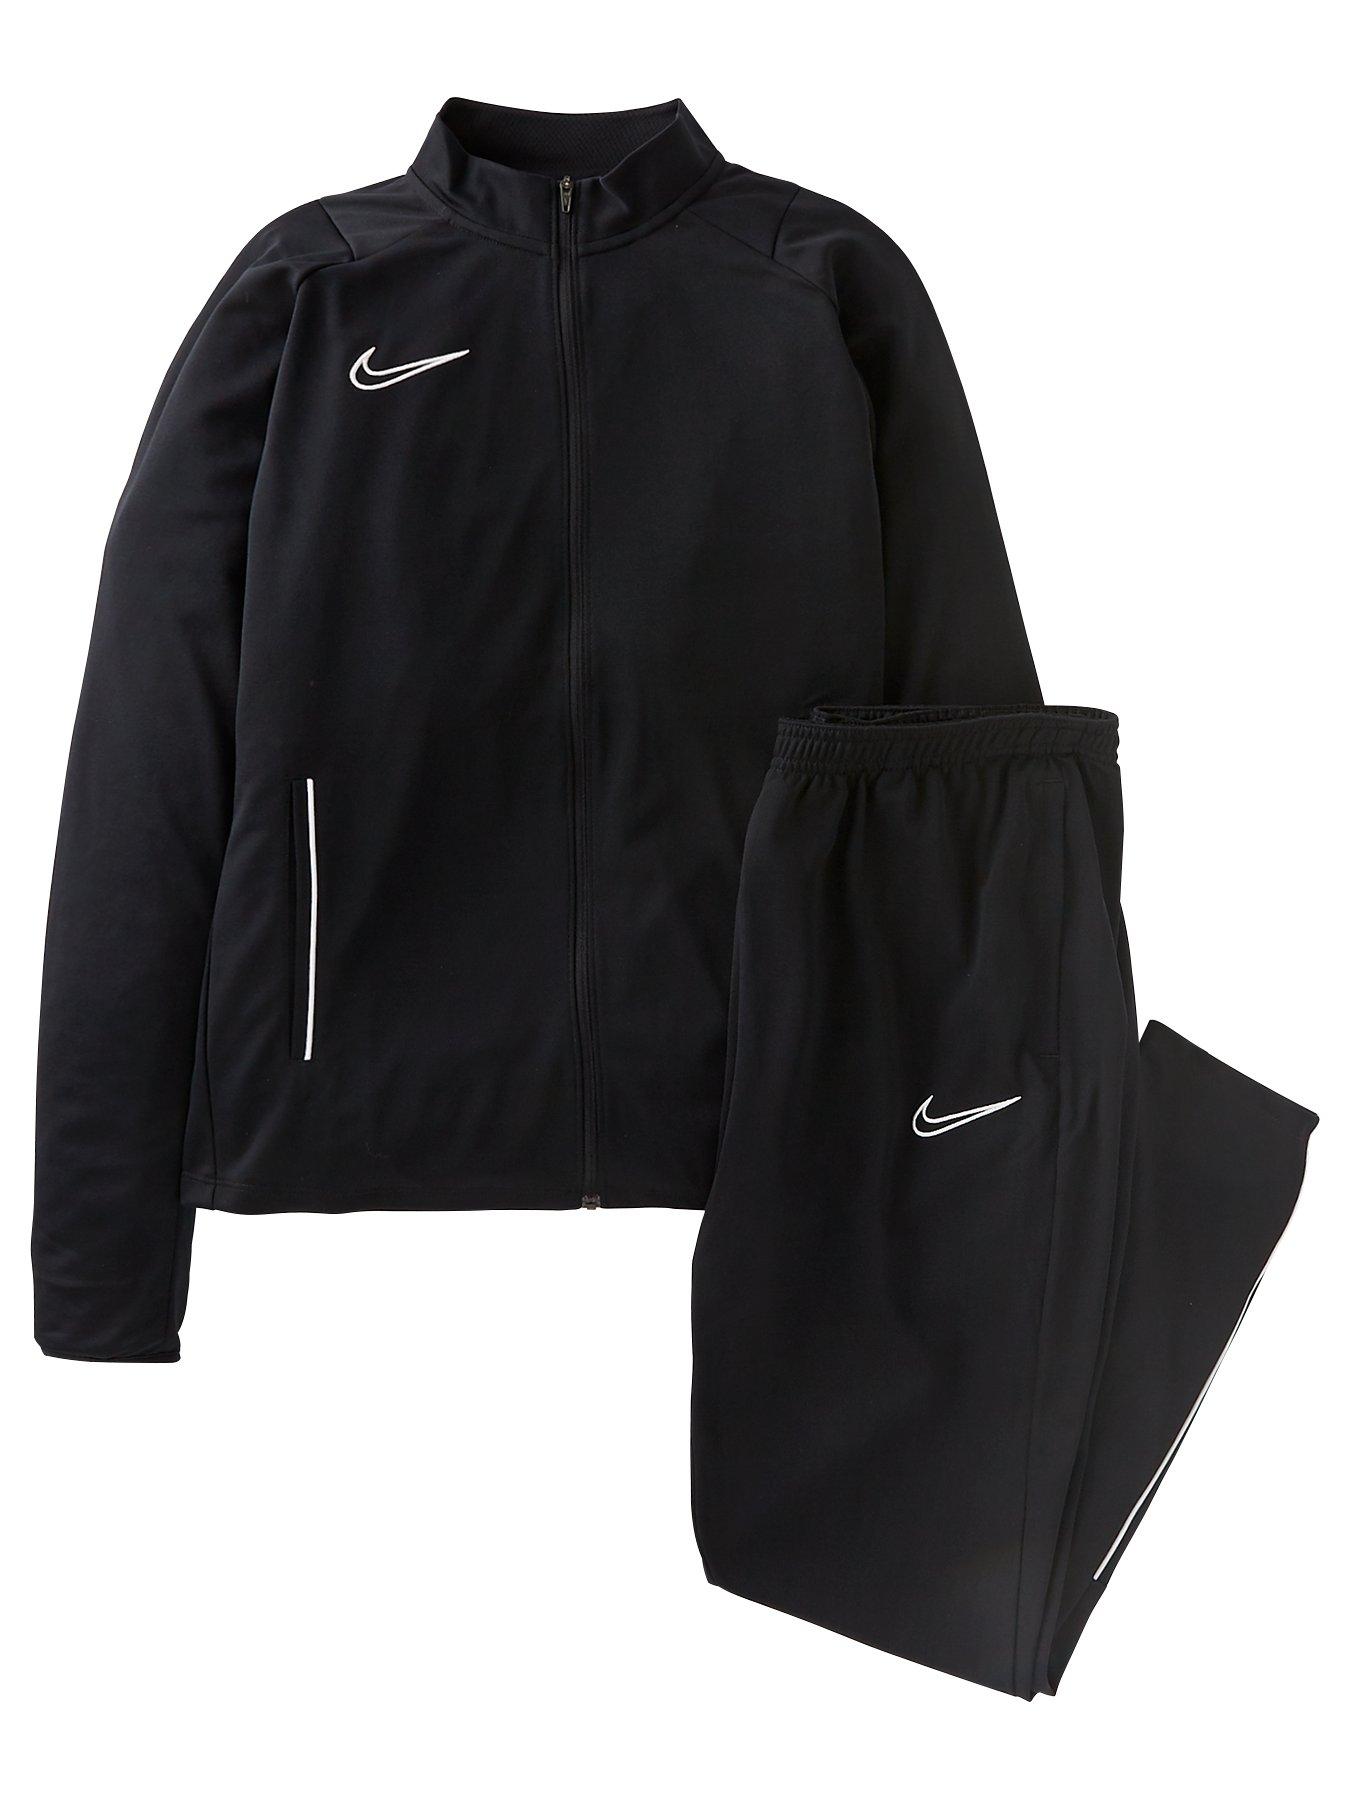  Womens Academy 21 Dry Tracksuit - Black